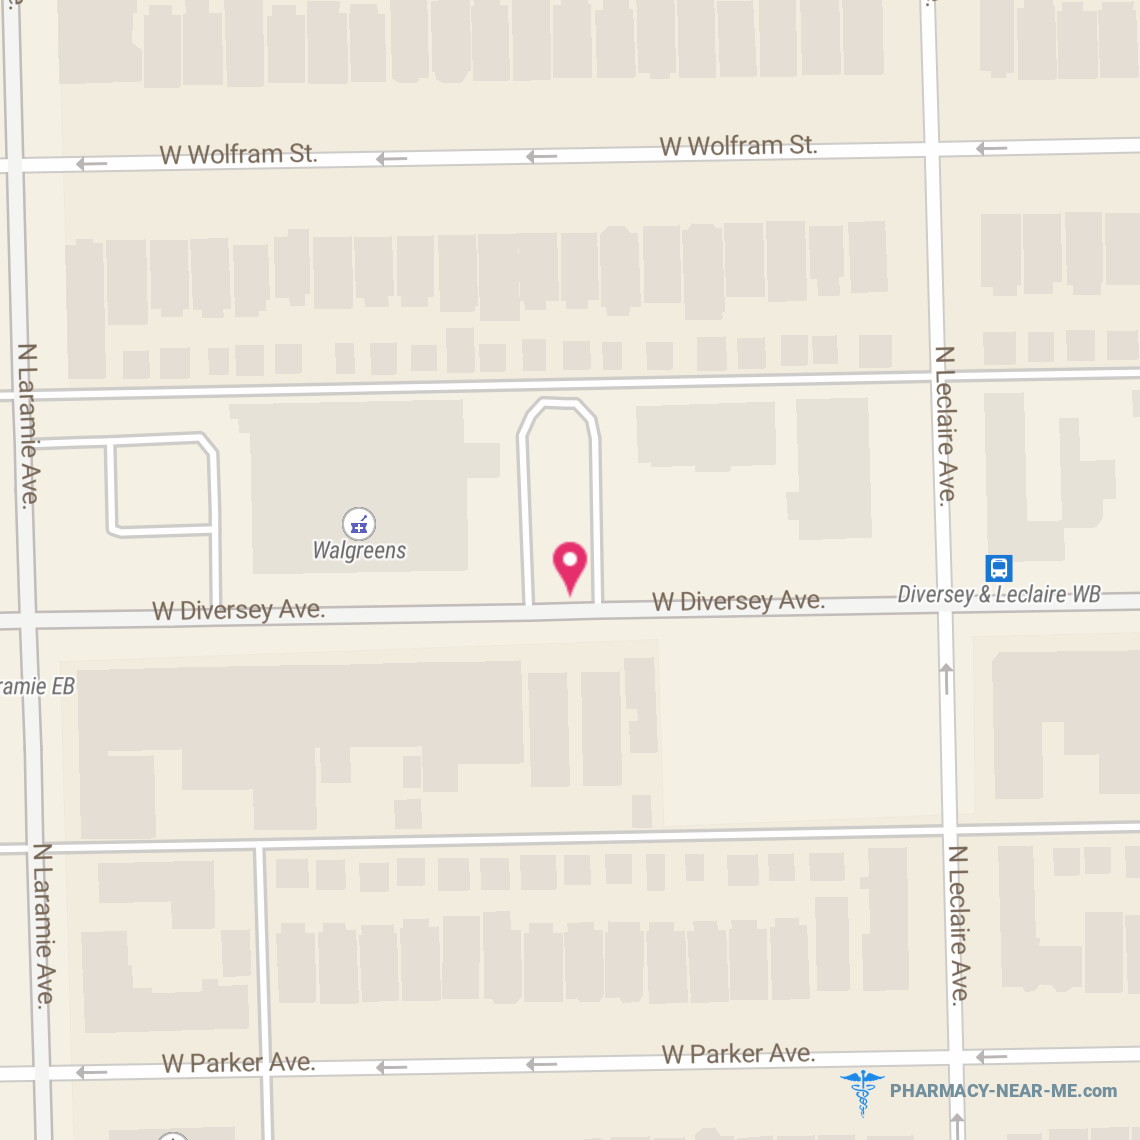 WALGREENS #03948 - Pharmacy Hours, Phone, Reviews & Information: 5140 W Diversey Ave, Chicago, IL 60639, USA